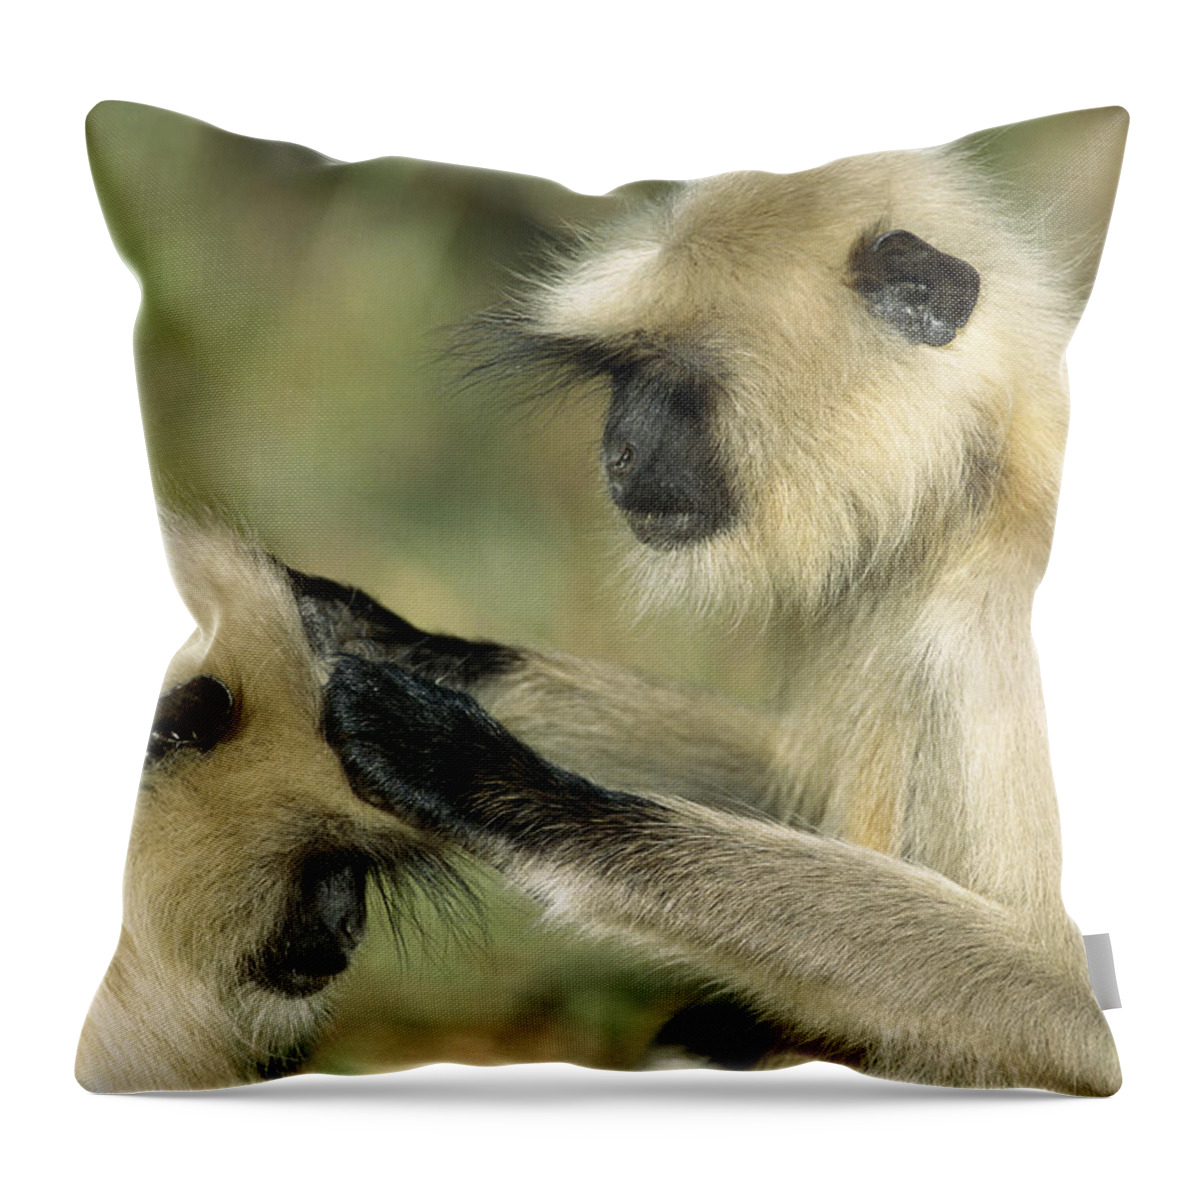 00620106 Throw Pillow featuring the photograph Hanuman Langurs Grooming India by Cyril Ruoso